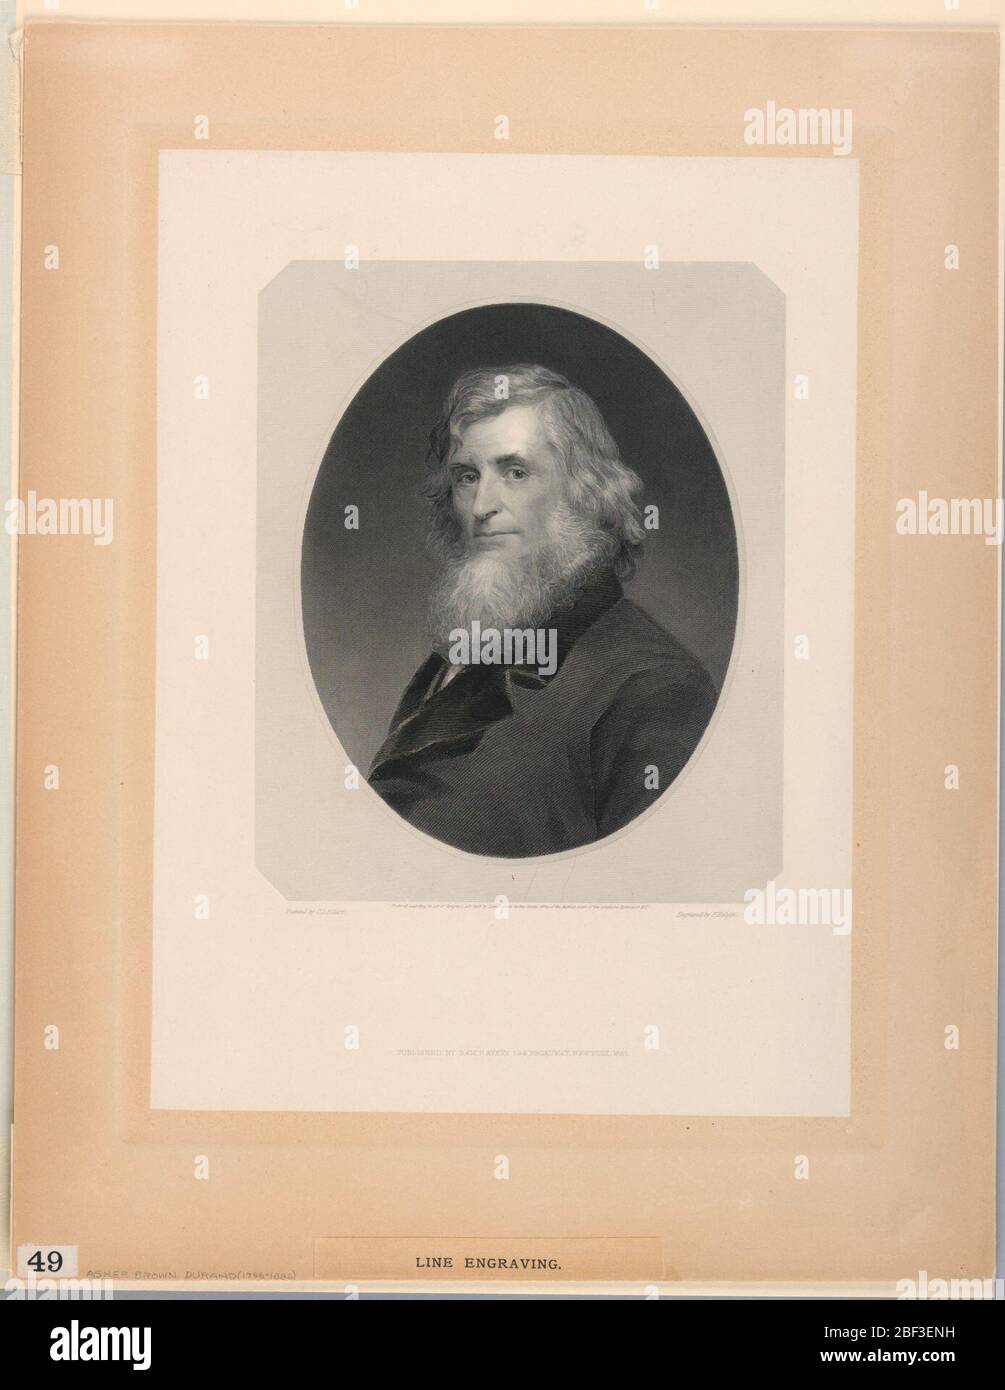 Portrait of Asher B Durand. Within an oval frame is a bust portrait of the painter, Asher Brown Durand (1796-1886), wearing a long, white beard and facing one quarter left. Below, artist's, engraver's and publisher's names. Stock Photo